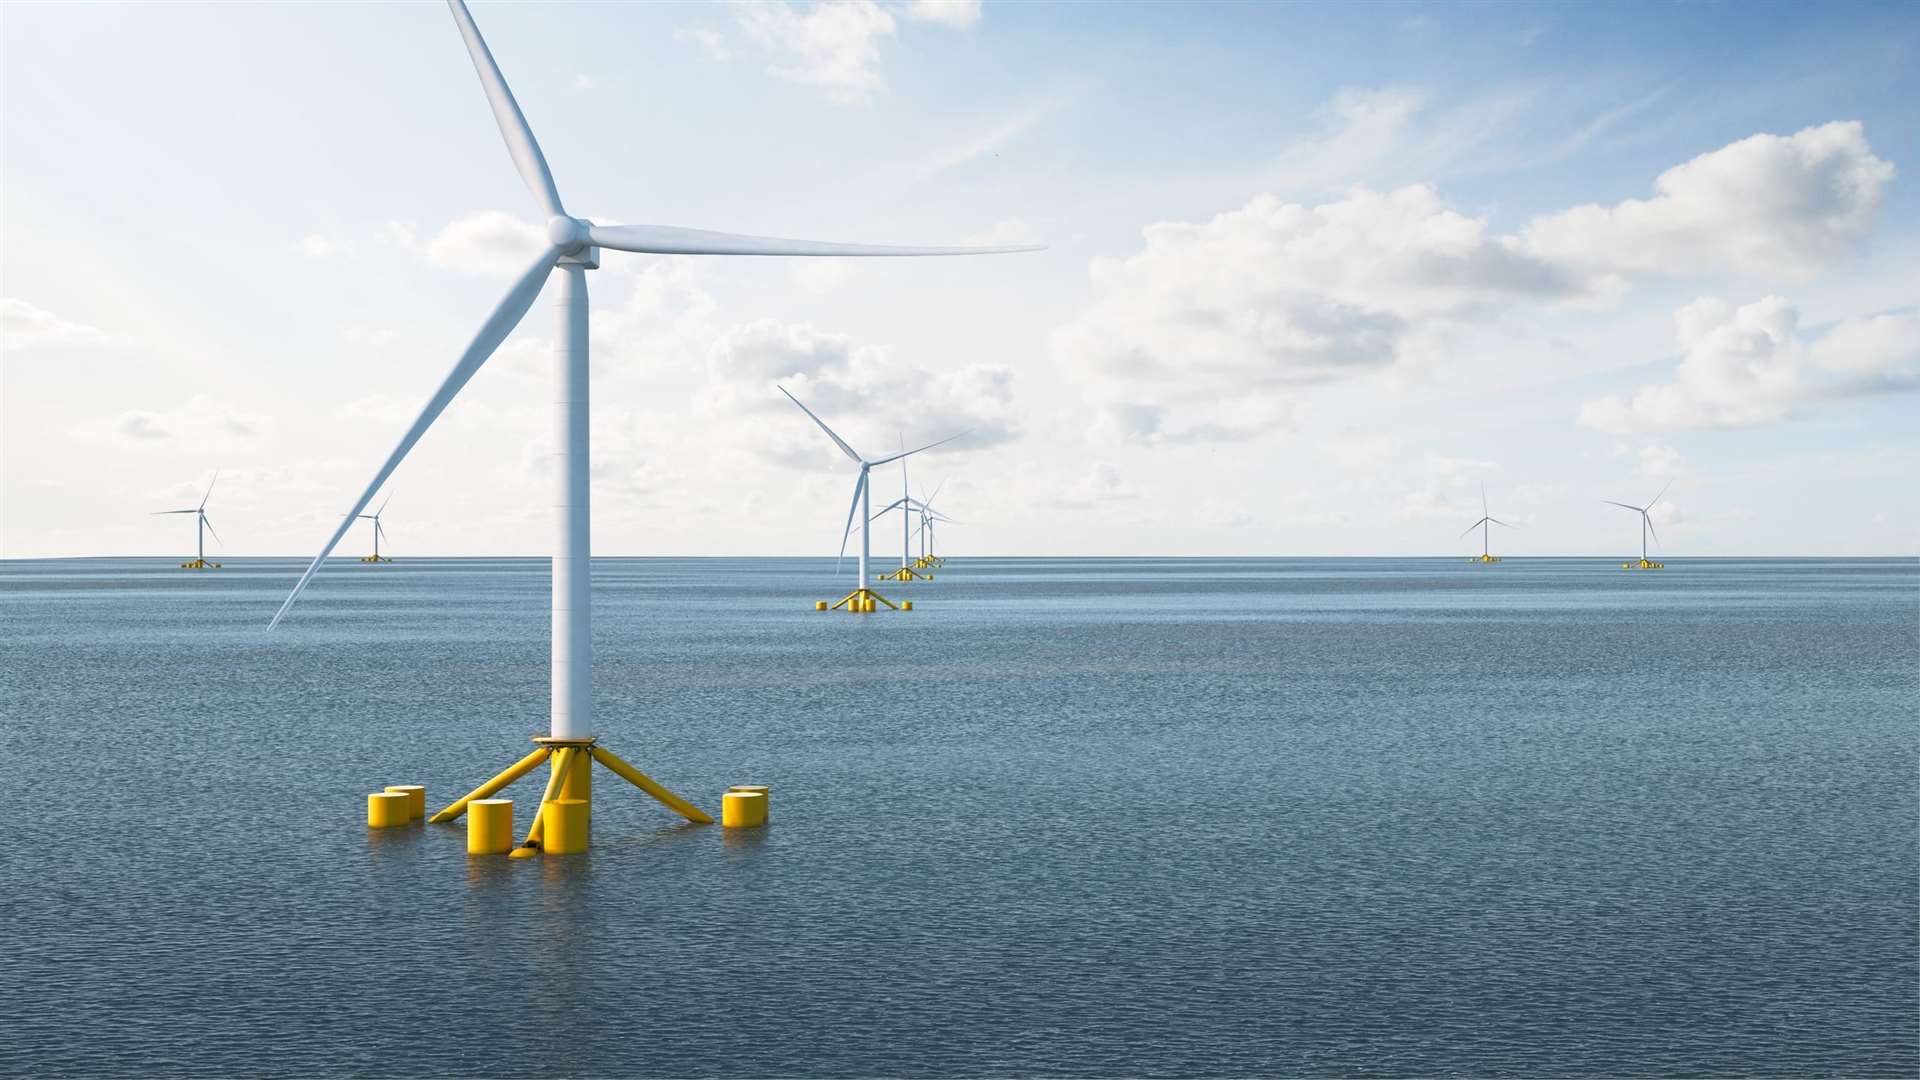 The Pentland Floating Offshore Wind Farm will be the largest project of its kind in the world when complete.